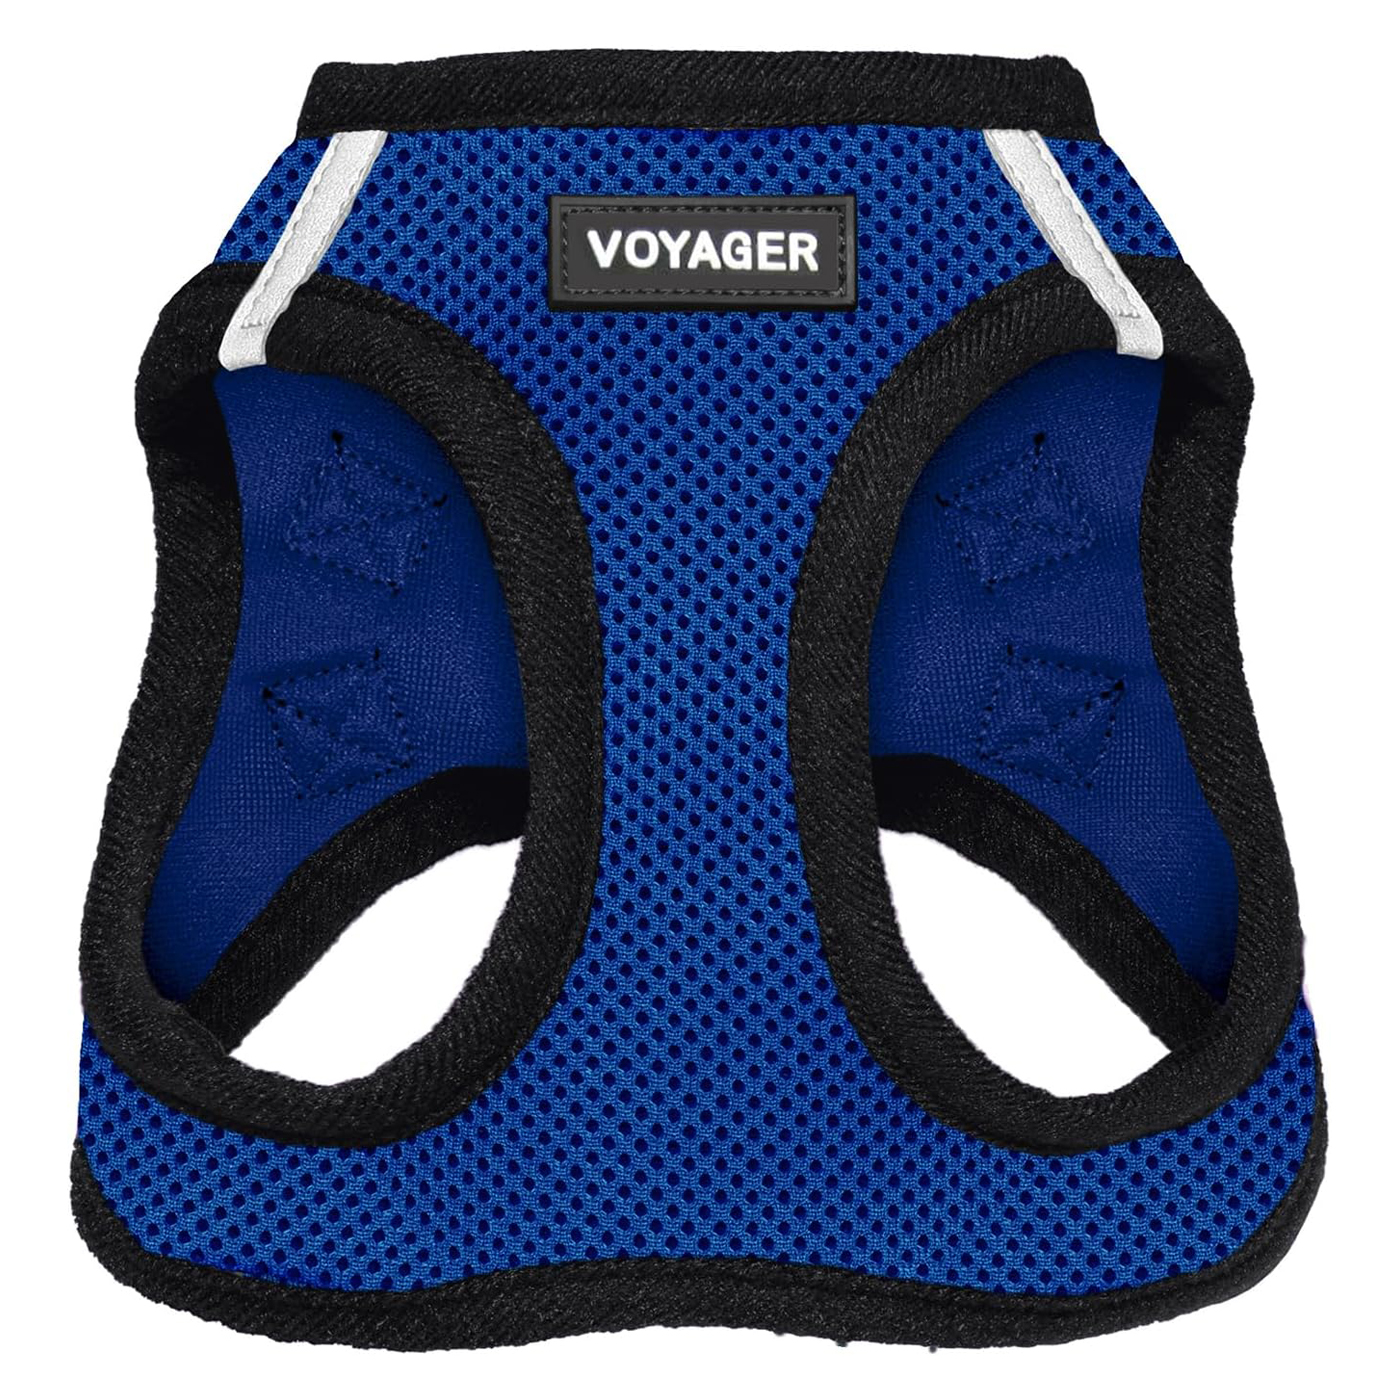 Voyager Step-in Air Dog Harness - All Weather Mesh Step in Vest Harness